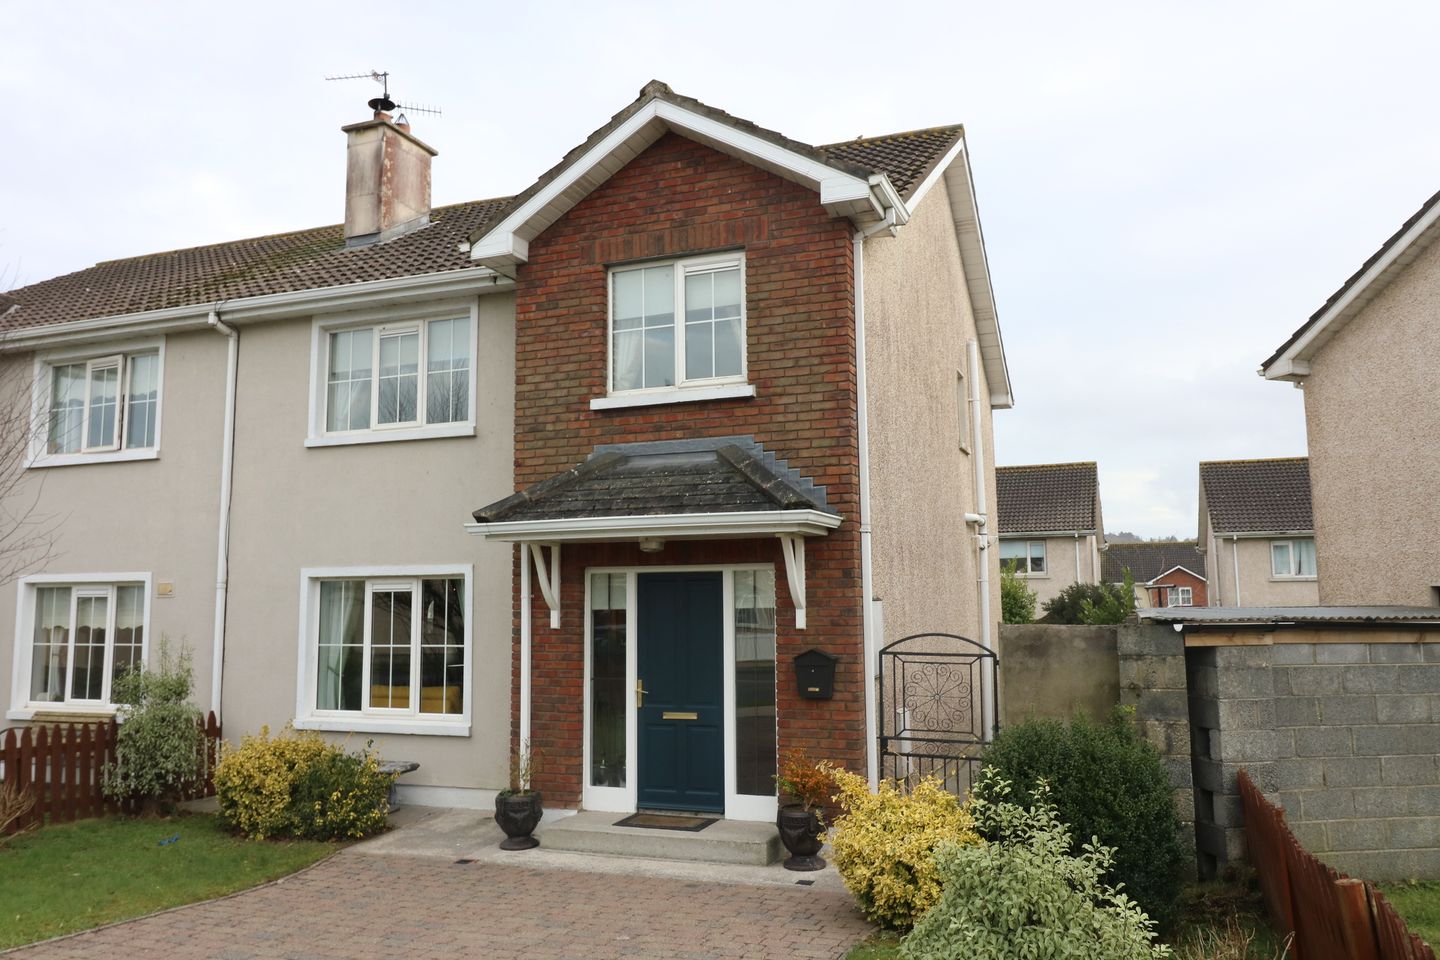 4 Sycamore Close, Green Hill Village, Carrick-on-Suir, Co. Tipperary, E32XC97